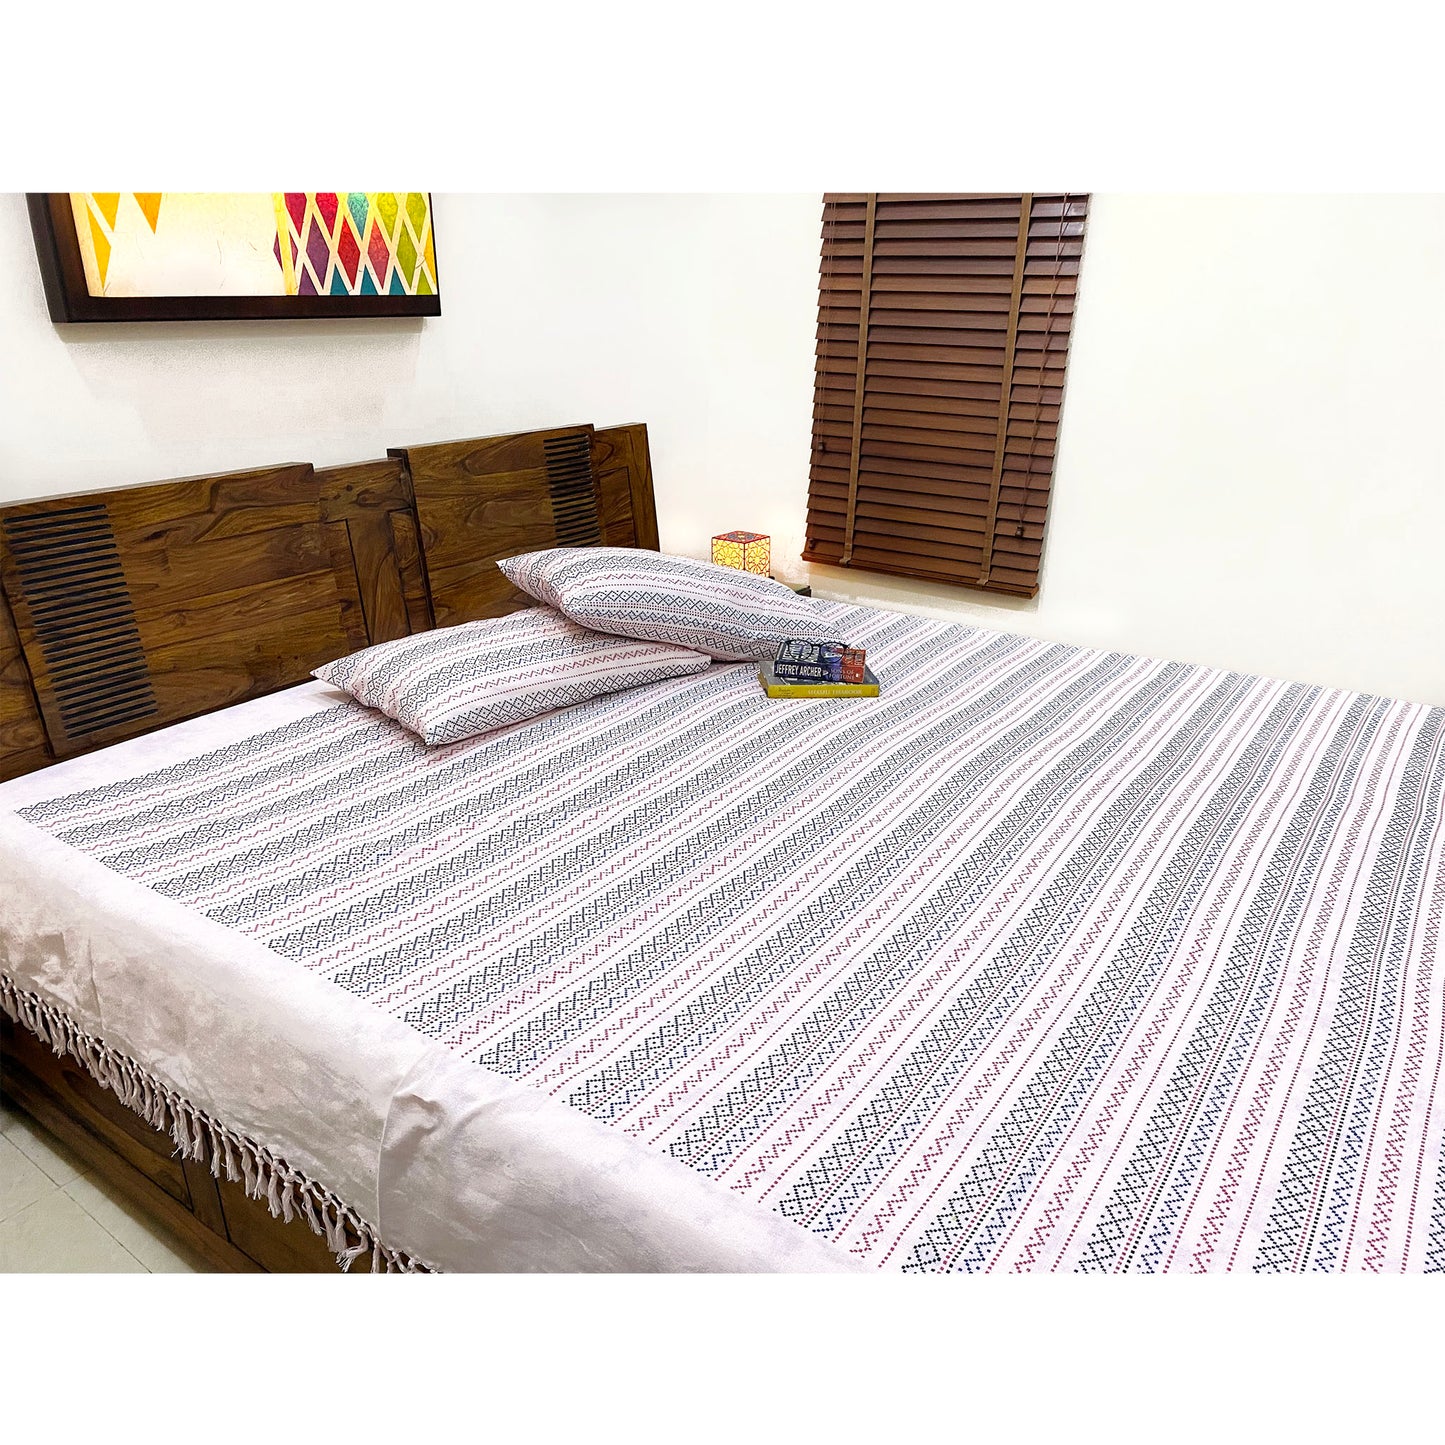 king-size-bed-sheet-with-pillow-covers-at-best-price